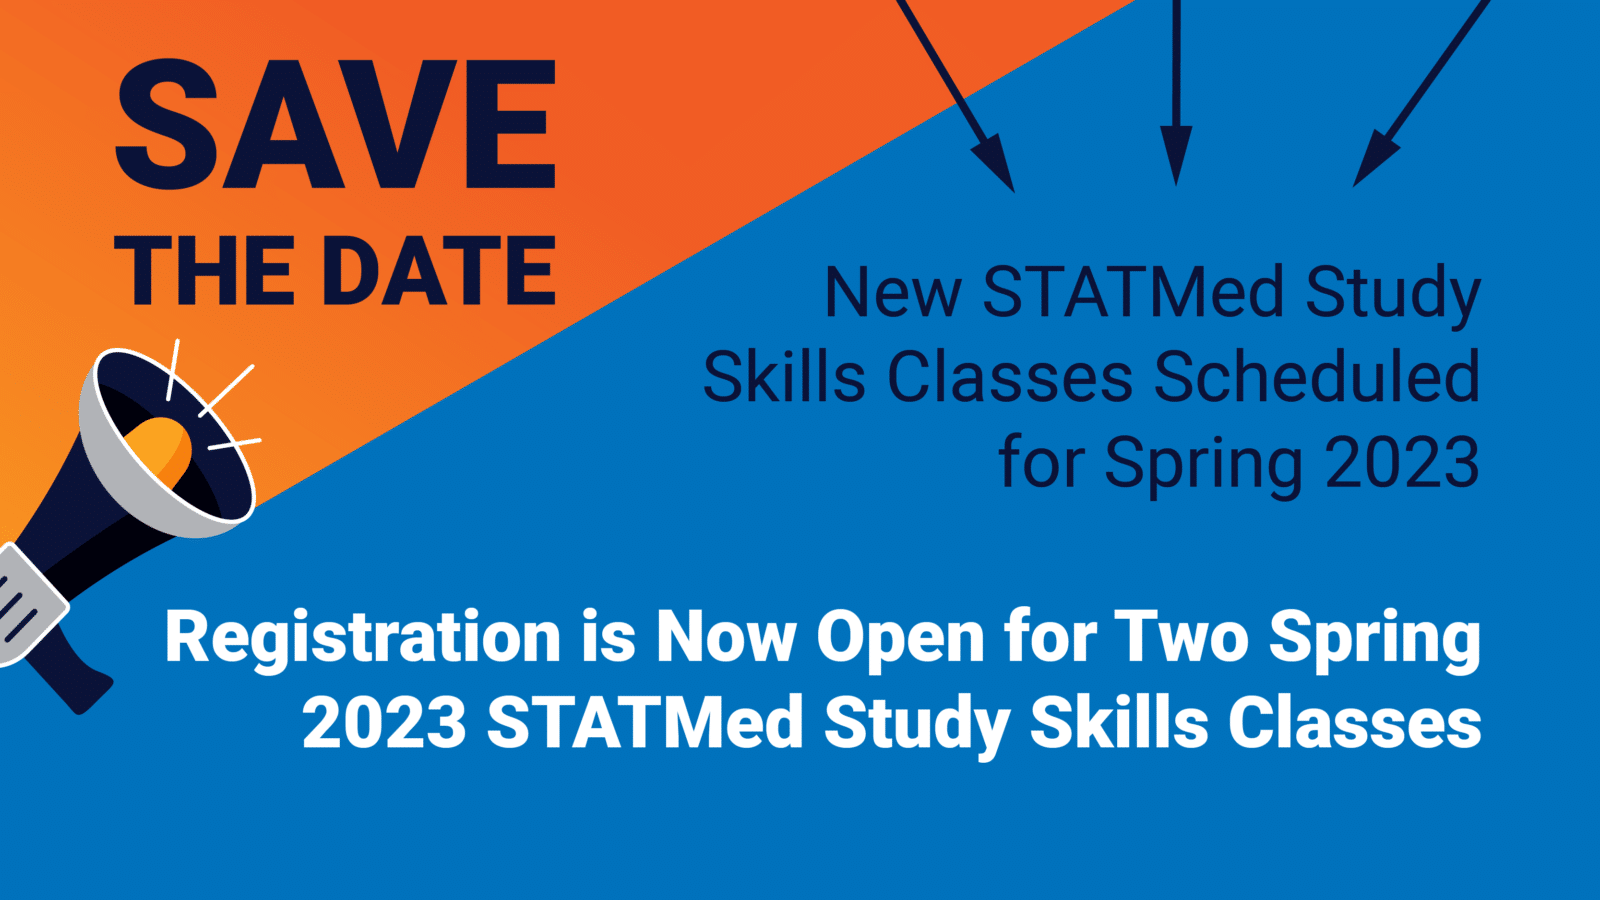 Megaphone on an orange and blue background announcing Save the Date: New STATMed Study Skills Classes Scheduled for Spring 2023